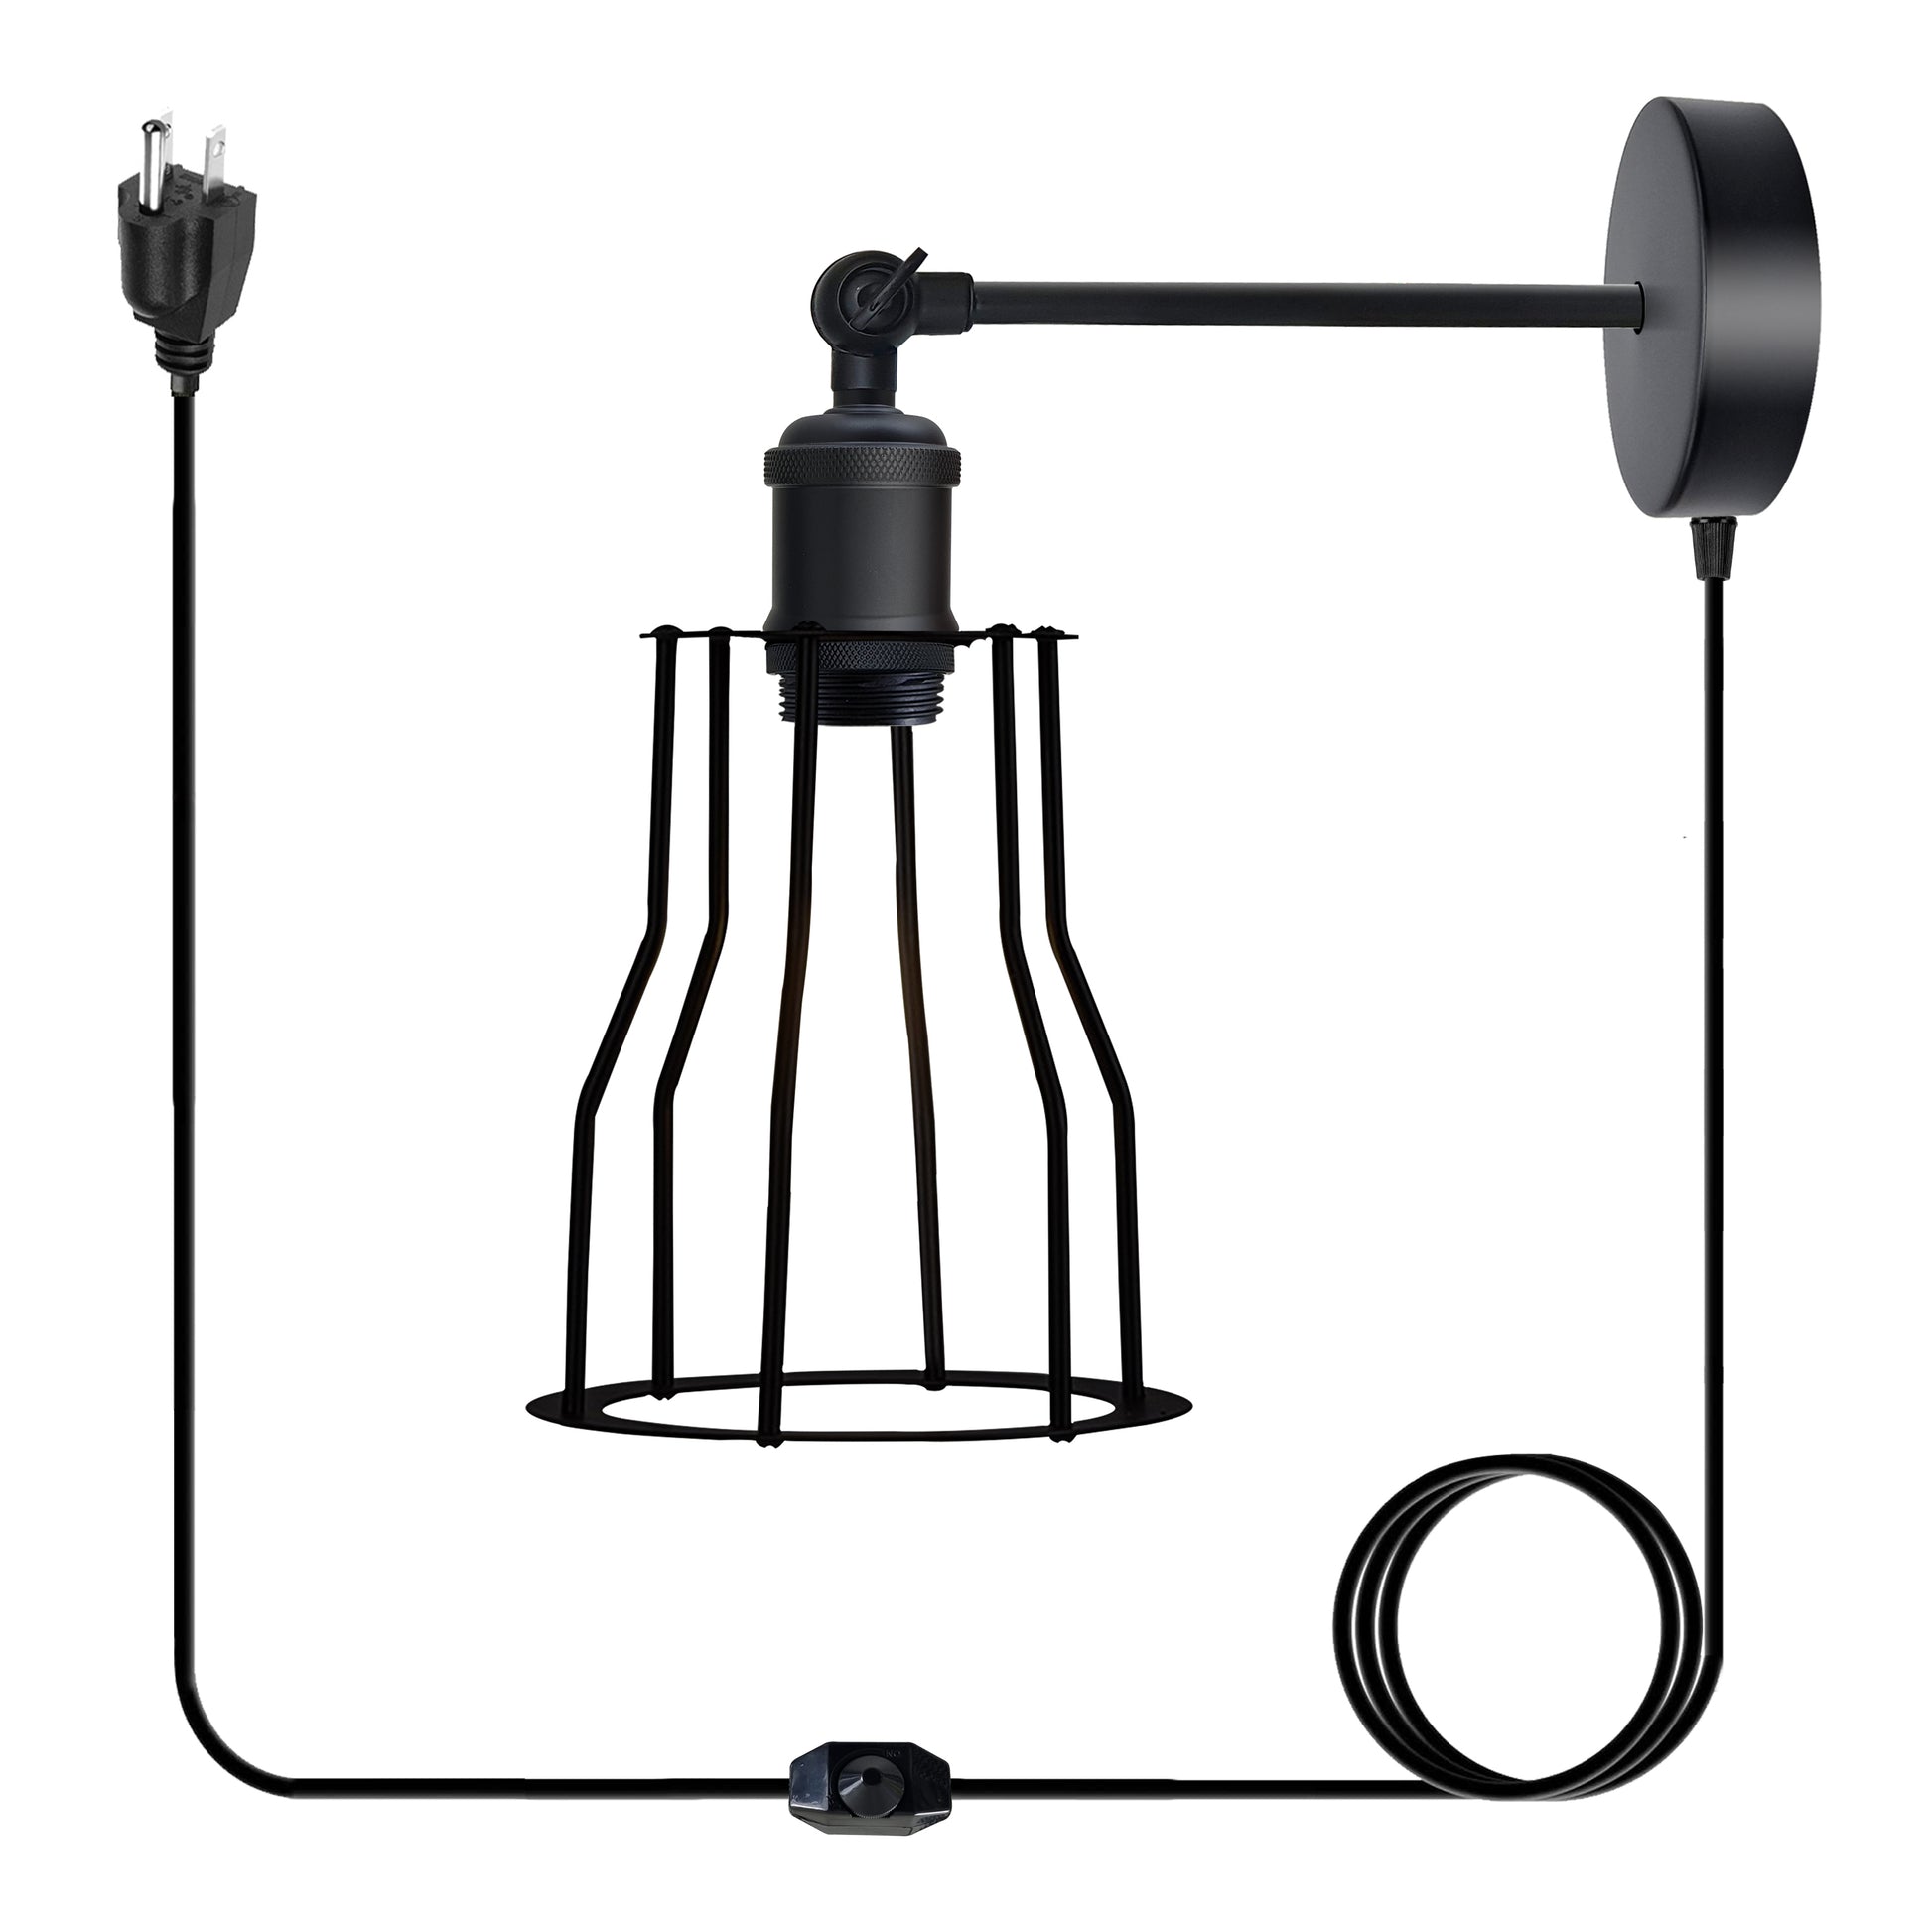 Mug Shape Plug-in Wall Sconce Lamp with dimmer switch.JPG